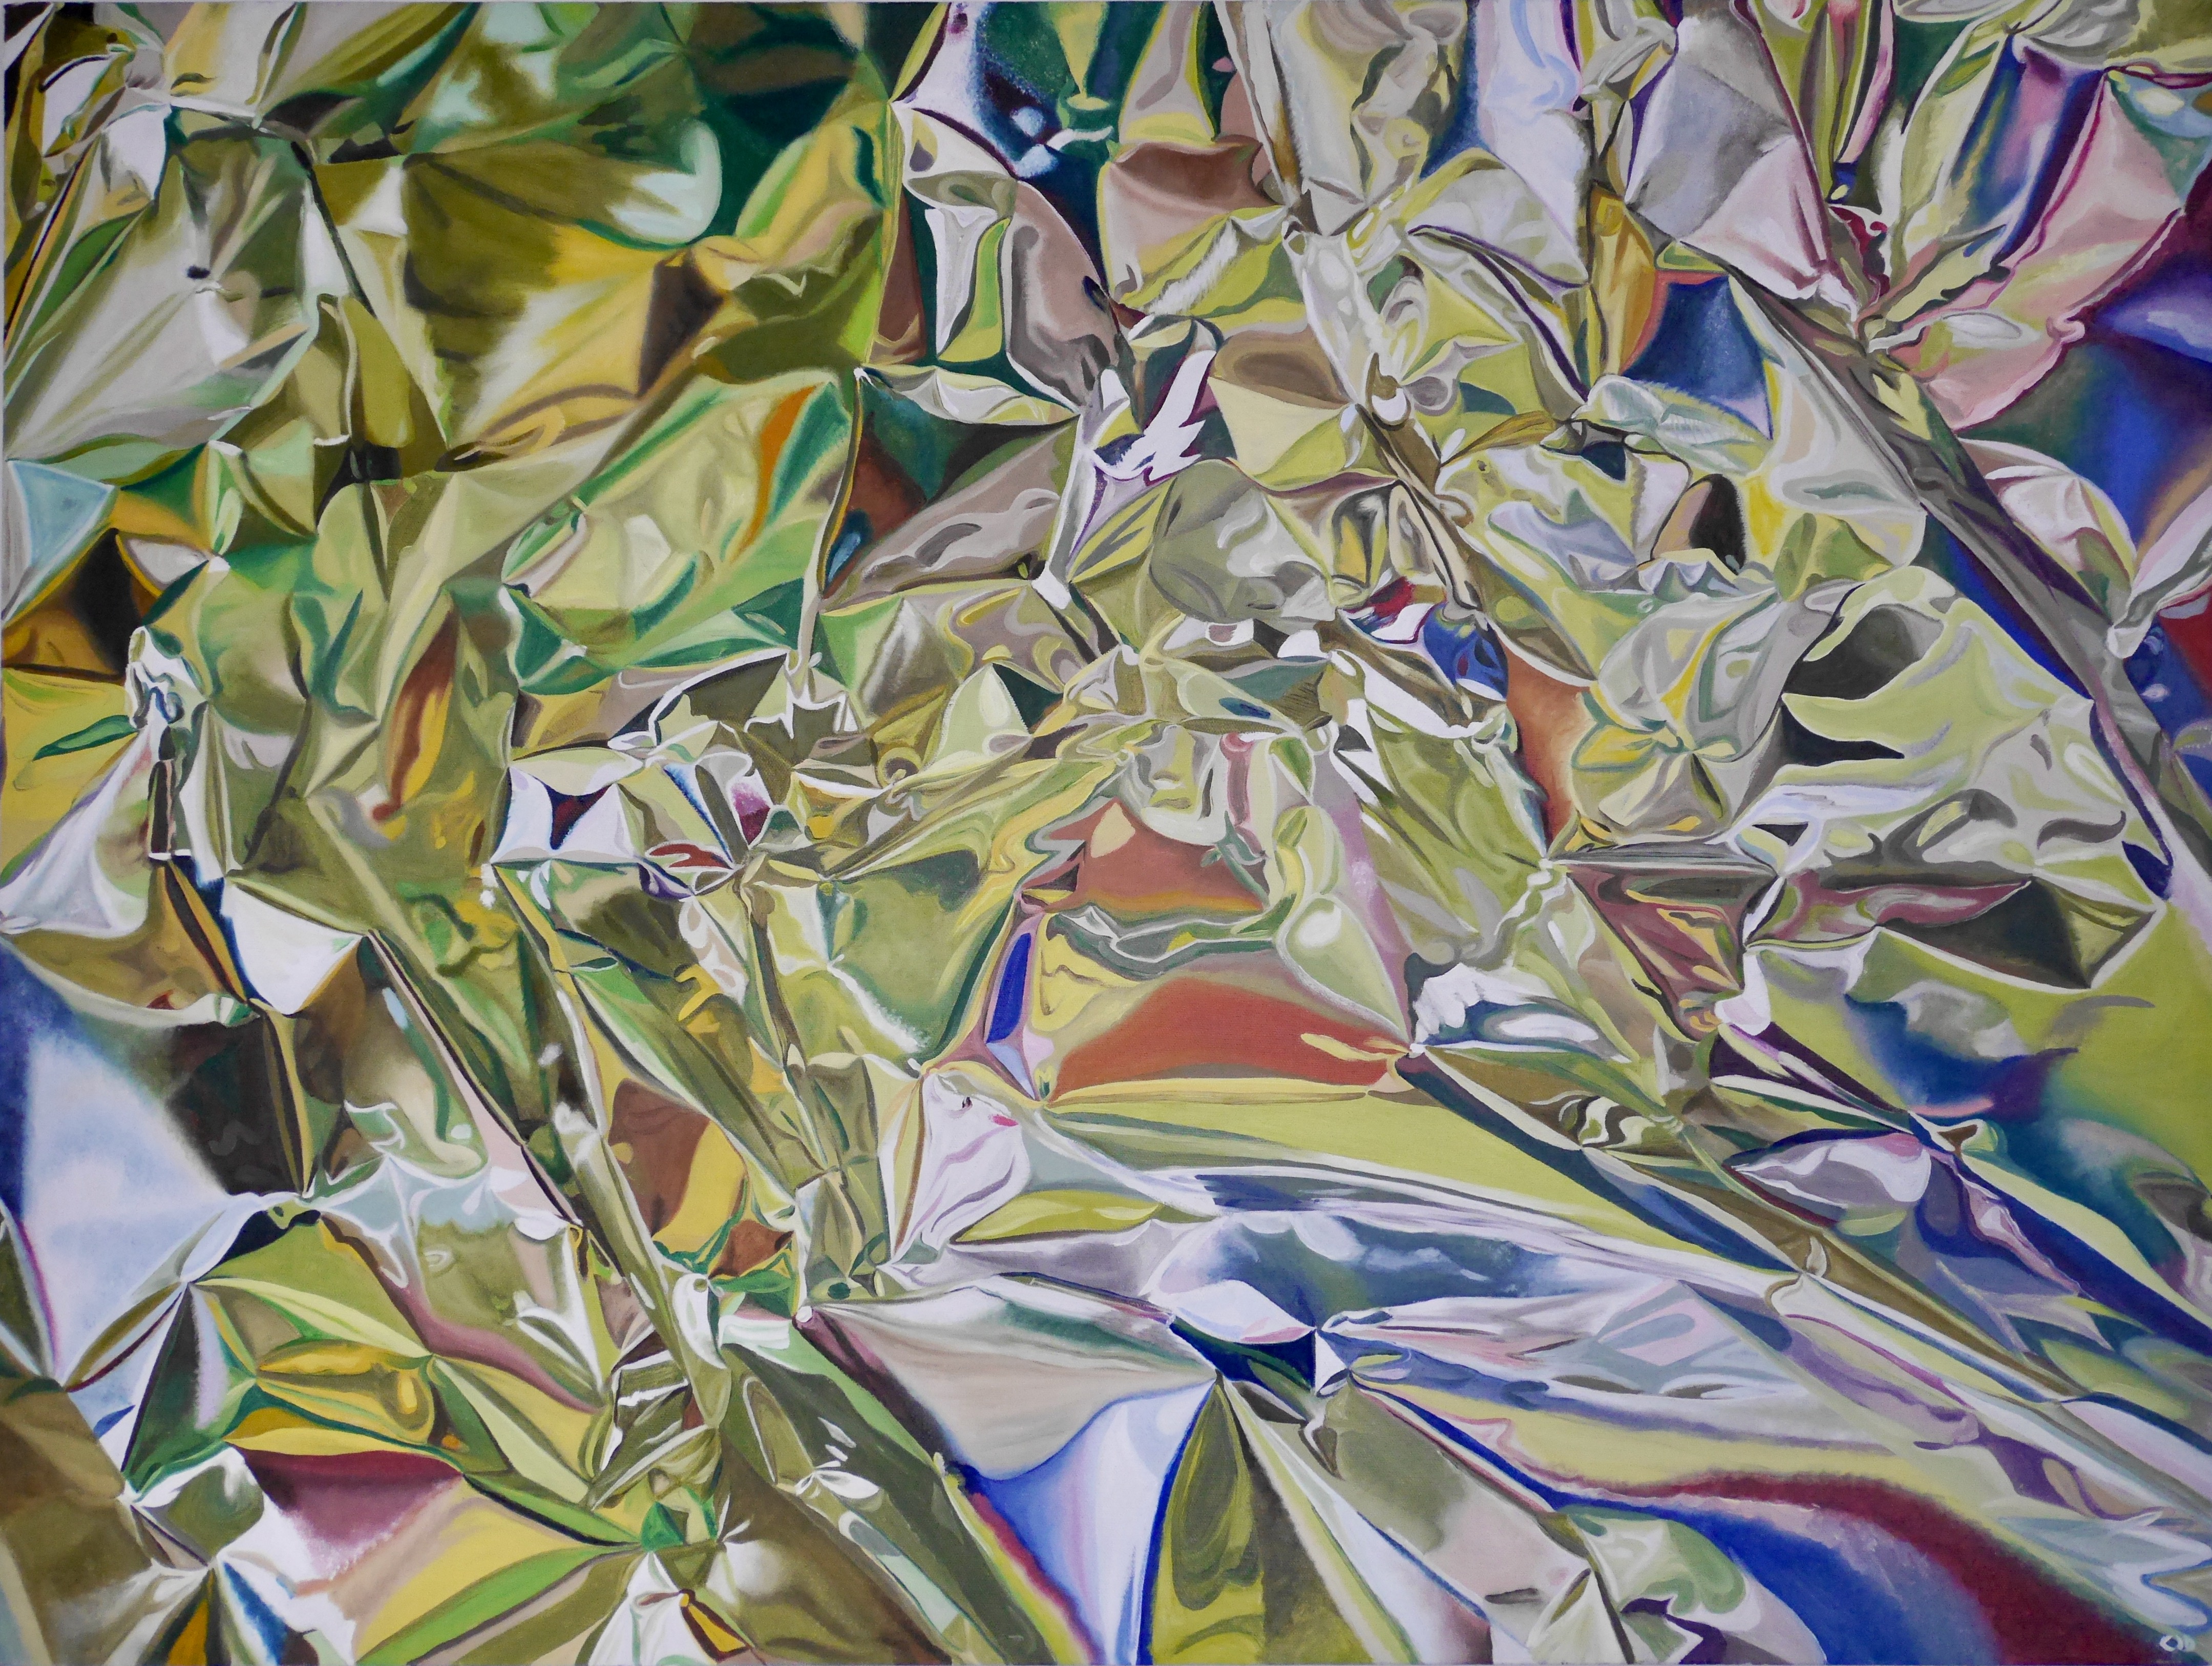 contemporary fine art oil painting of a crumpled reflective silver chrome surface with green and pink by saatchiart artist Christian Dodd